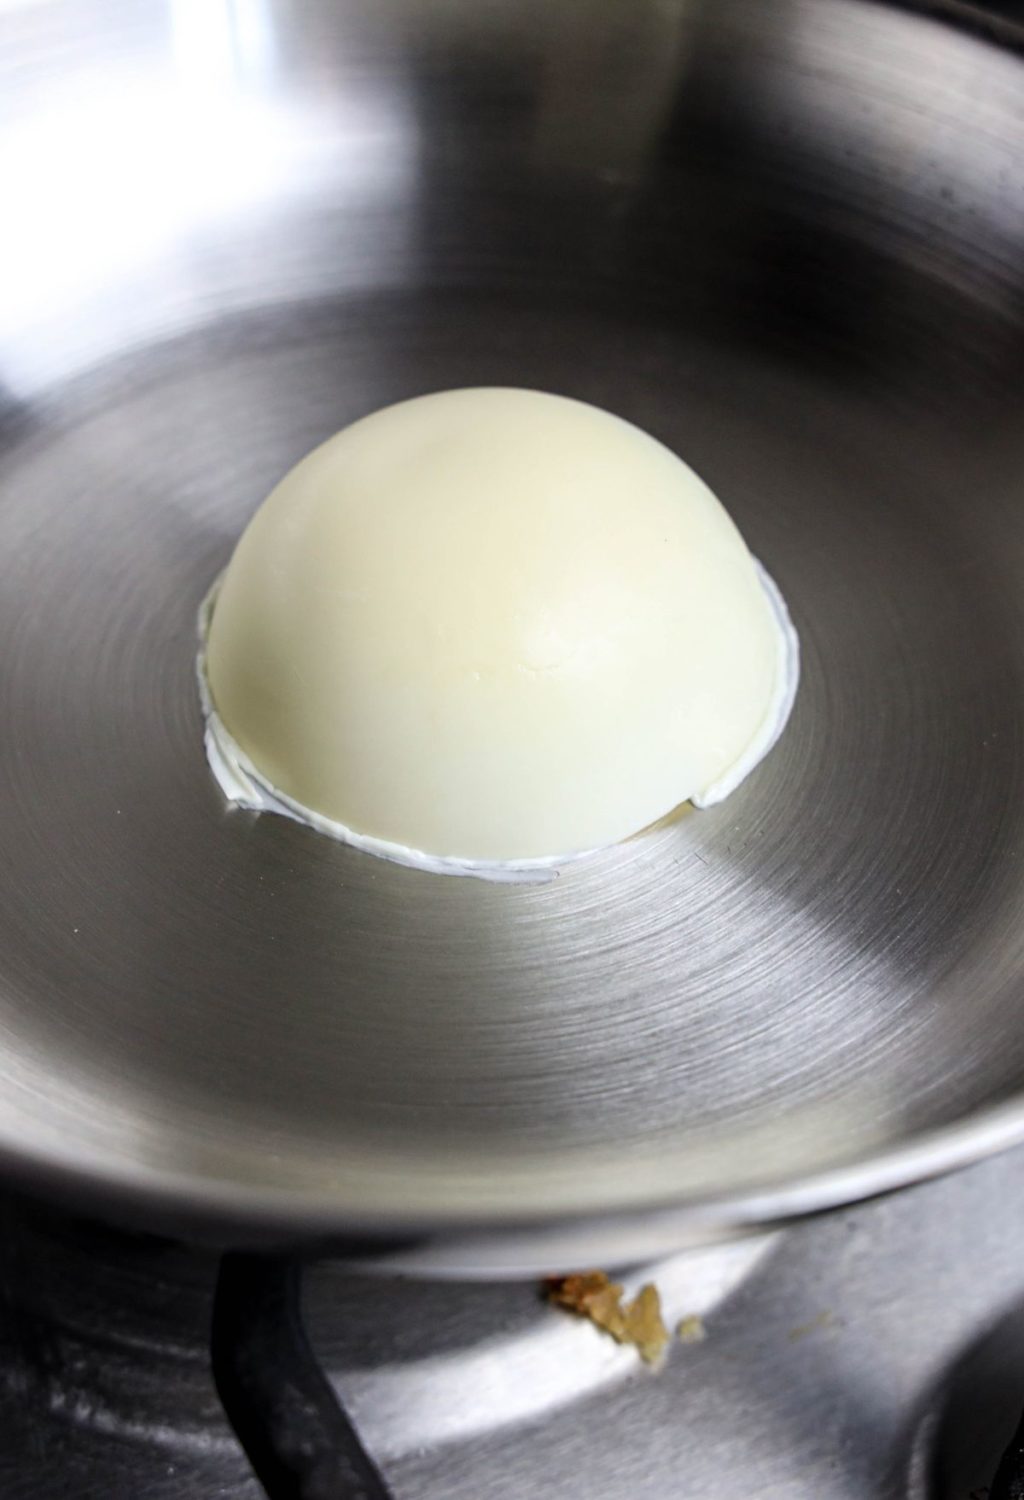 An egg is being cooked in a frying pan.